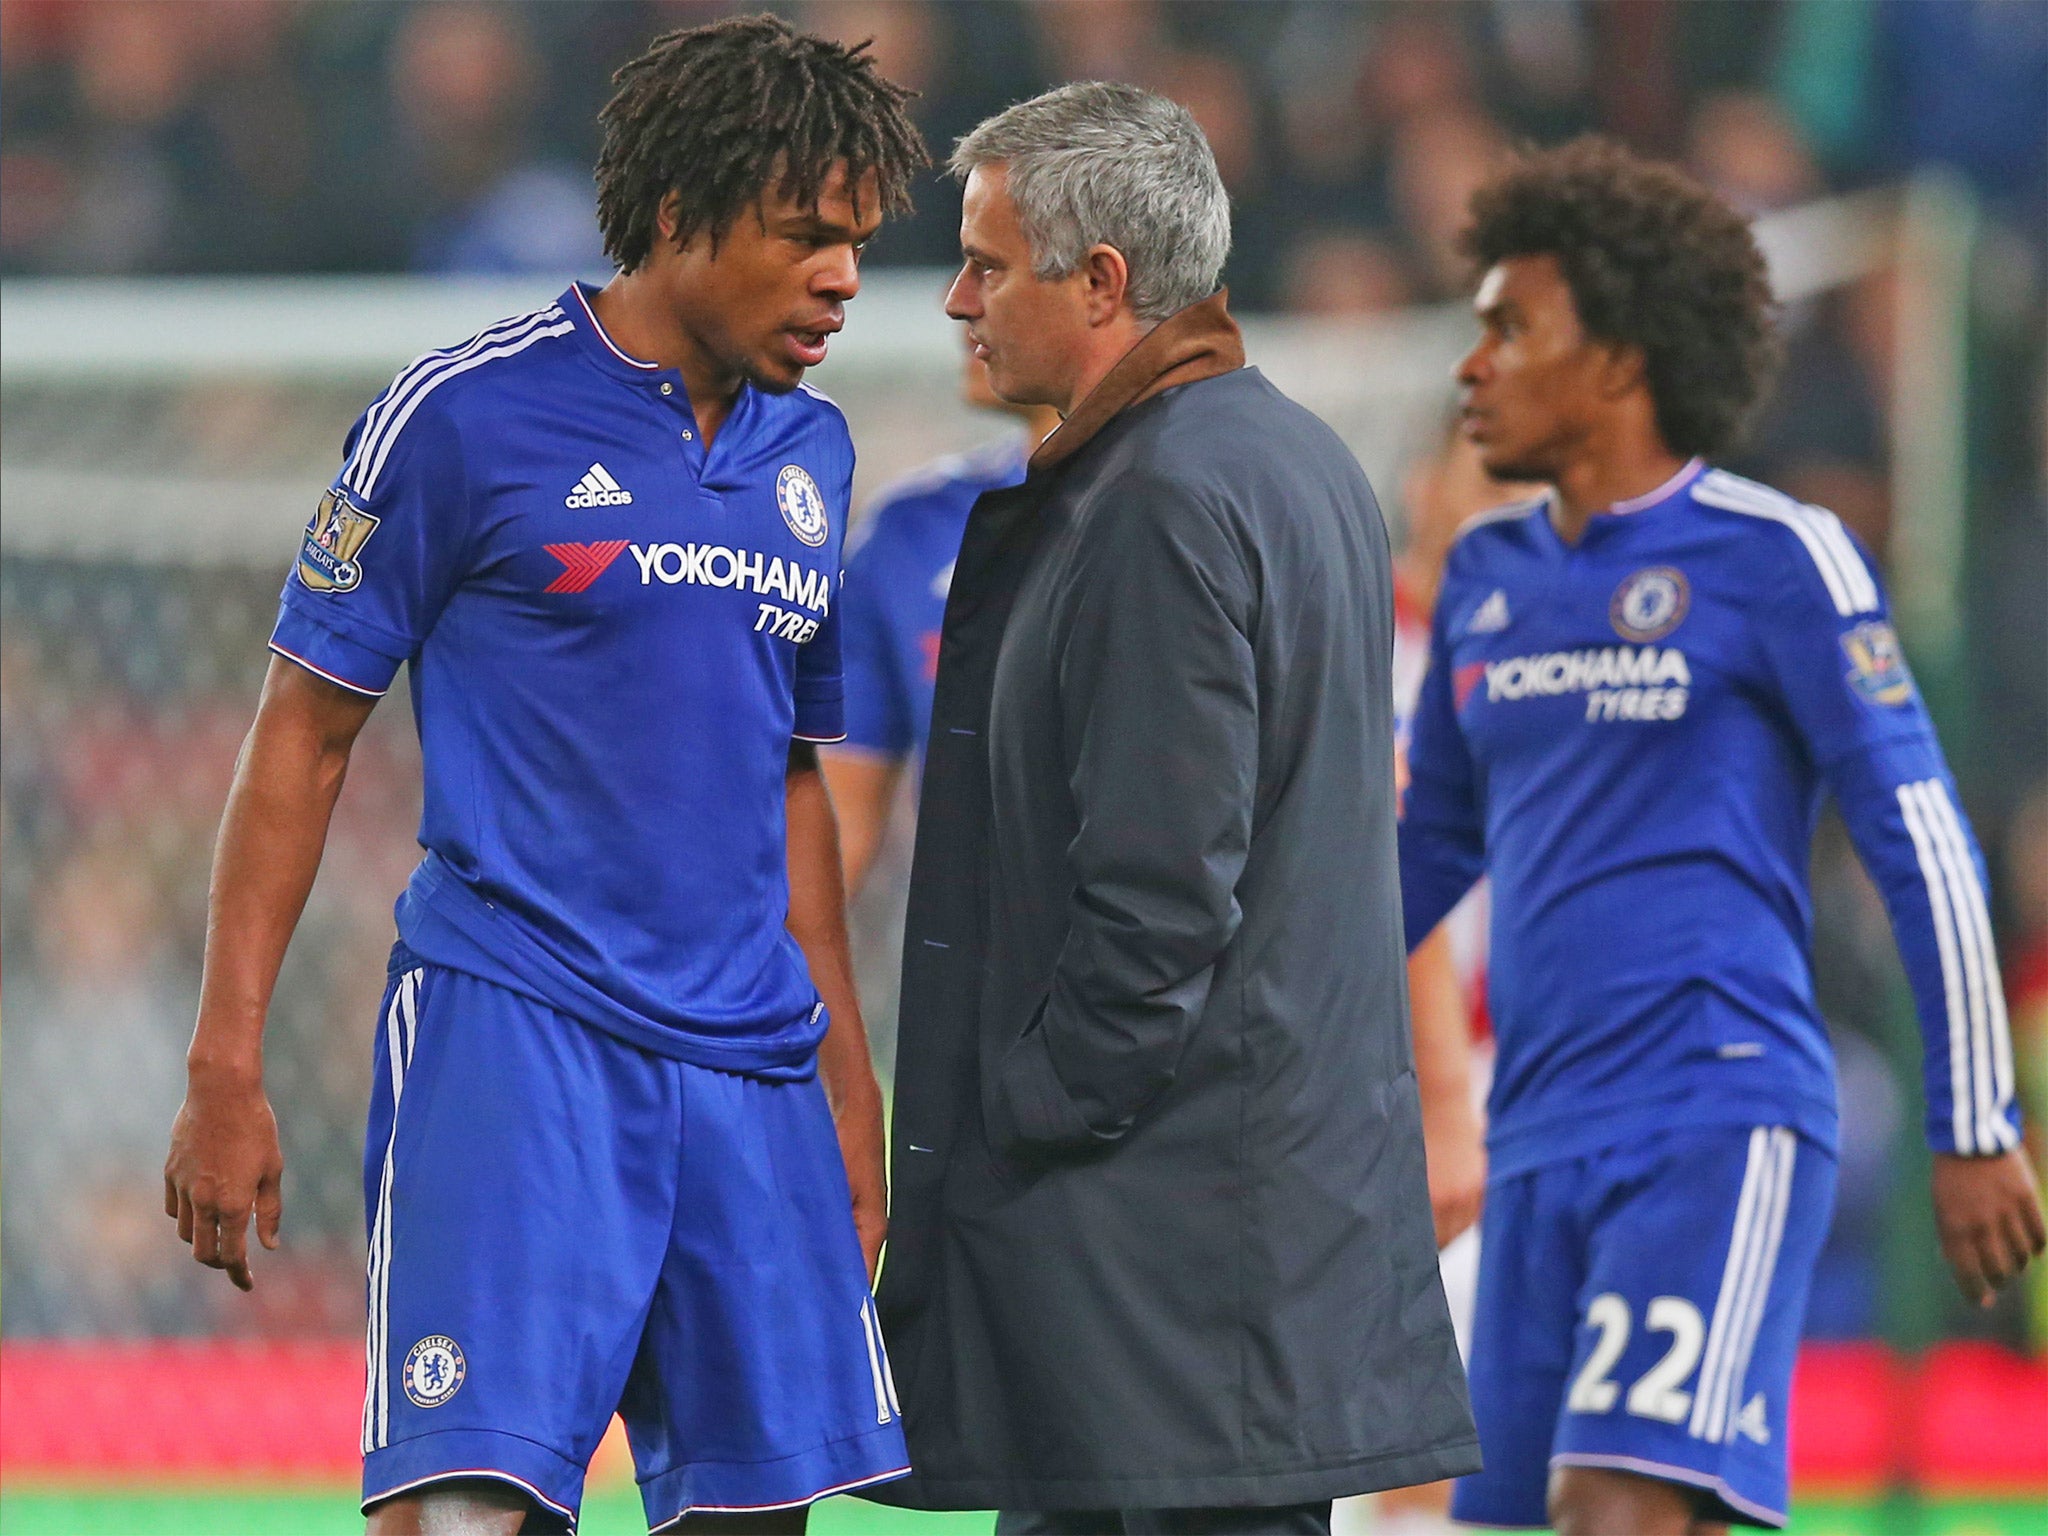 Chelsea striker Loic Remy speaking with his manager on Tuesday night